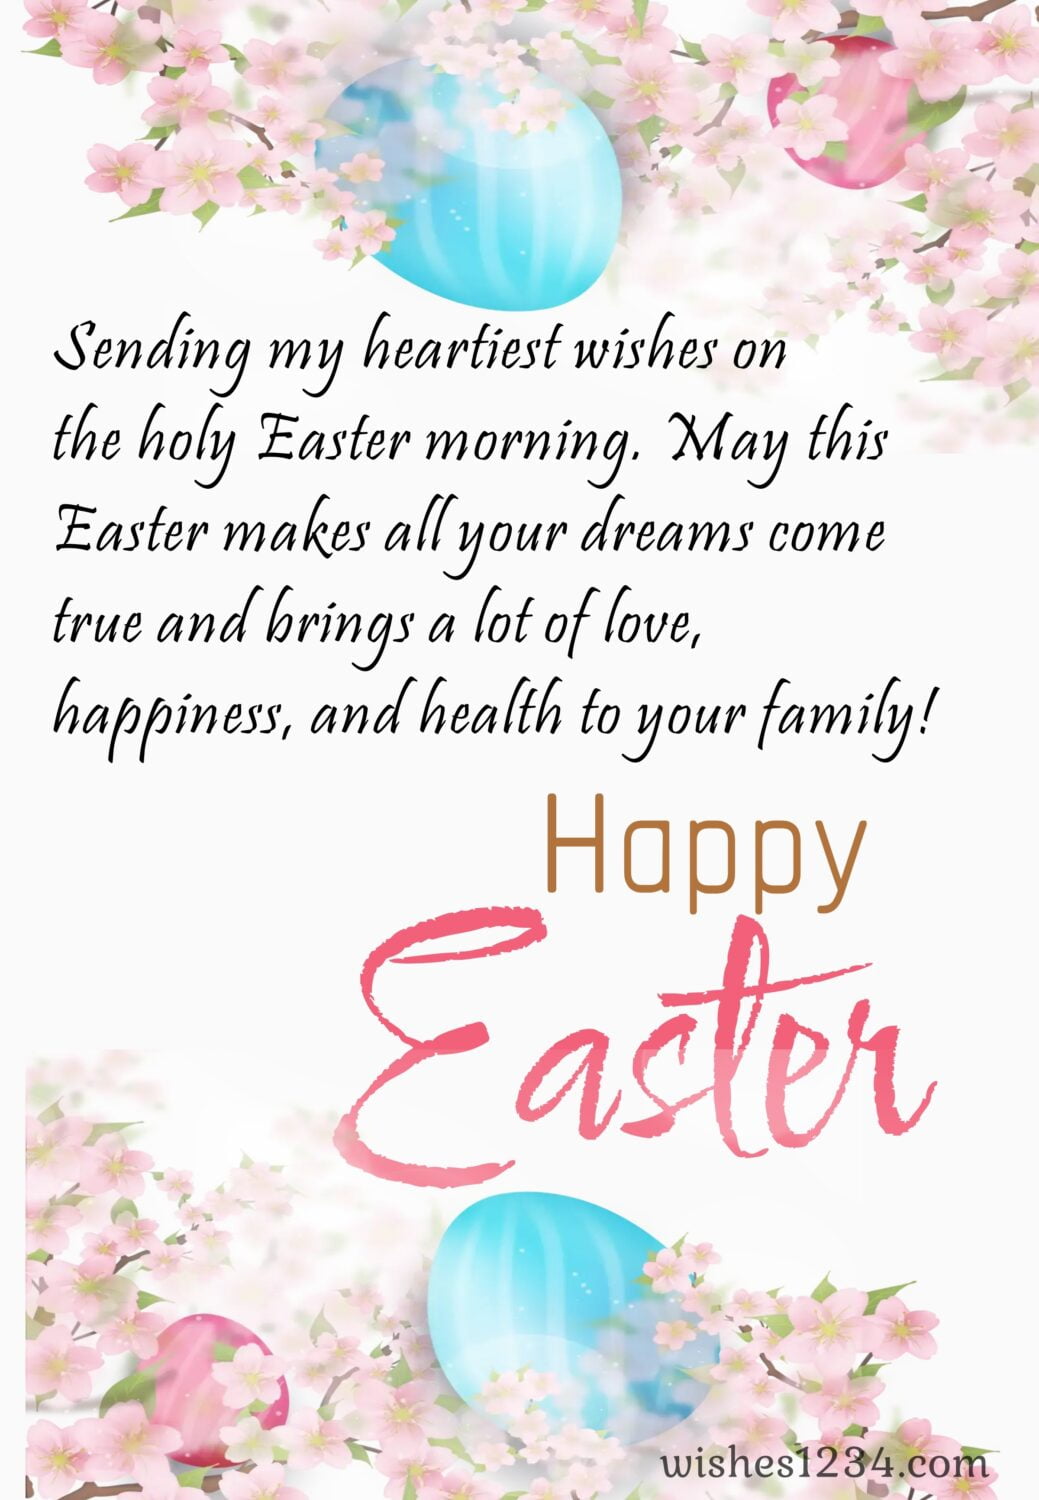 Easter eggs and pink lily flower background, Happy Easter Wishes, Quotes & Images.